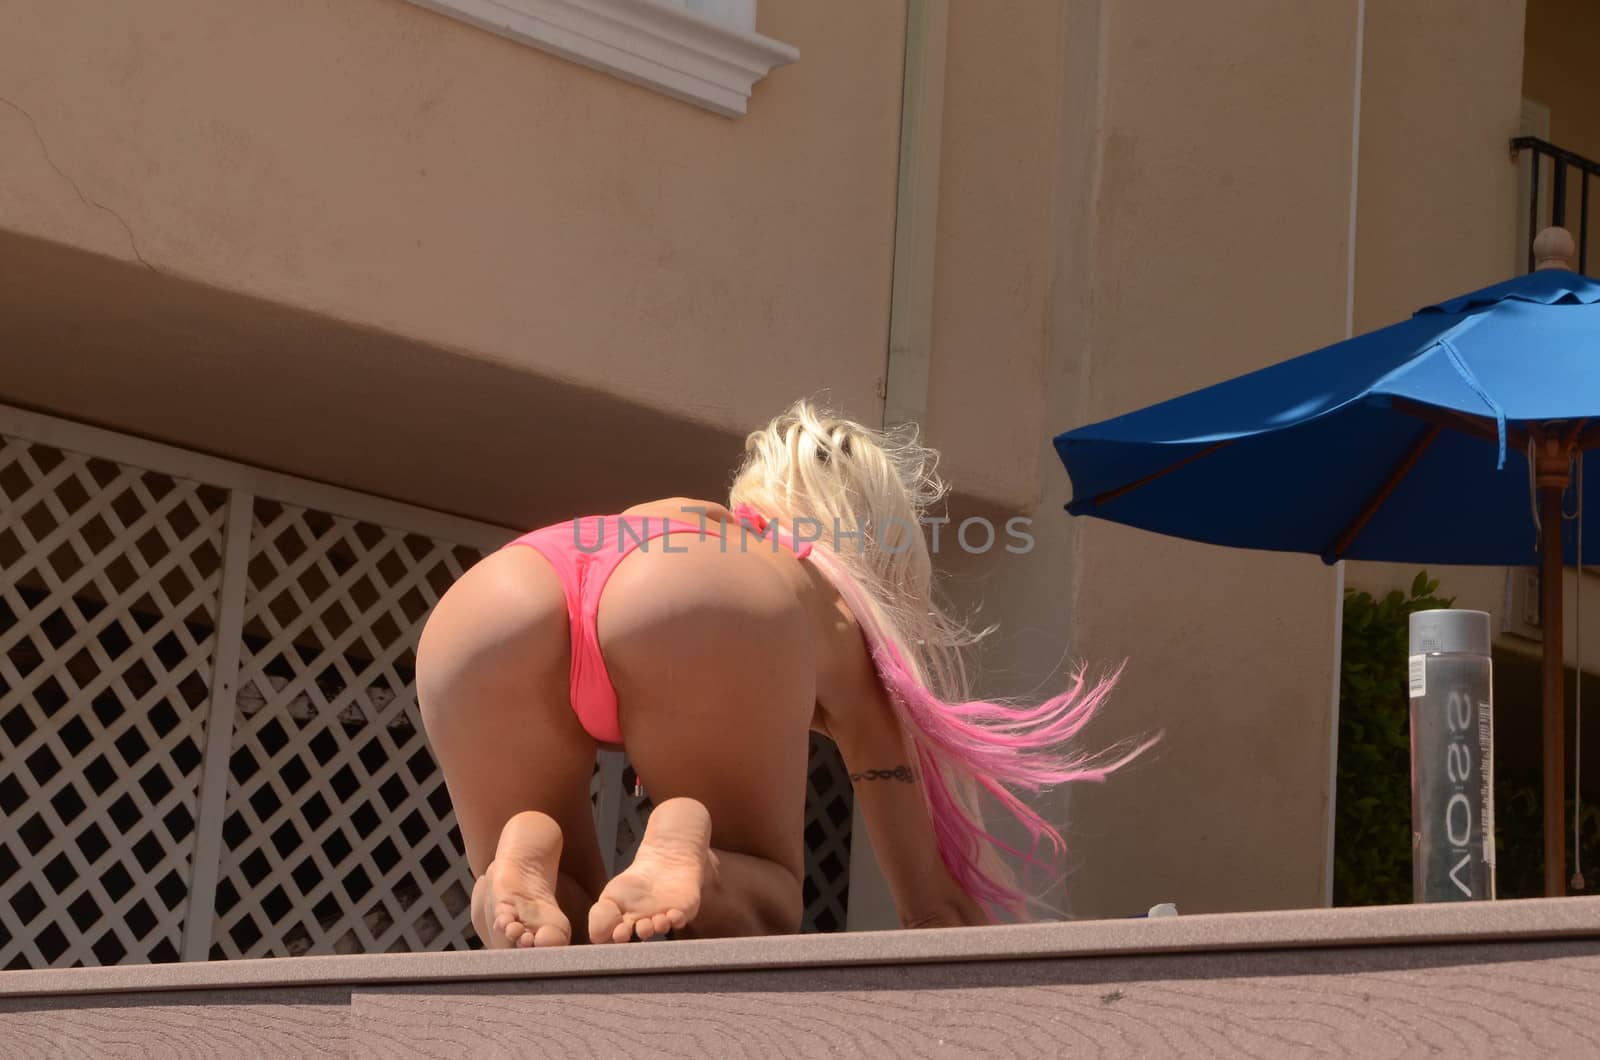 Frenchy Morgan the "Celebrity Big Brother" Star is spotted in a tiny pink bikini tanning, texting and taking selfies, Malibu, CA 05-09-17